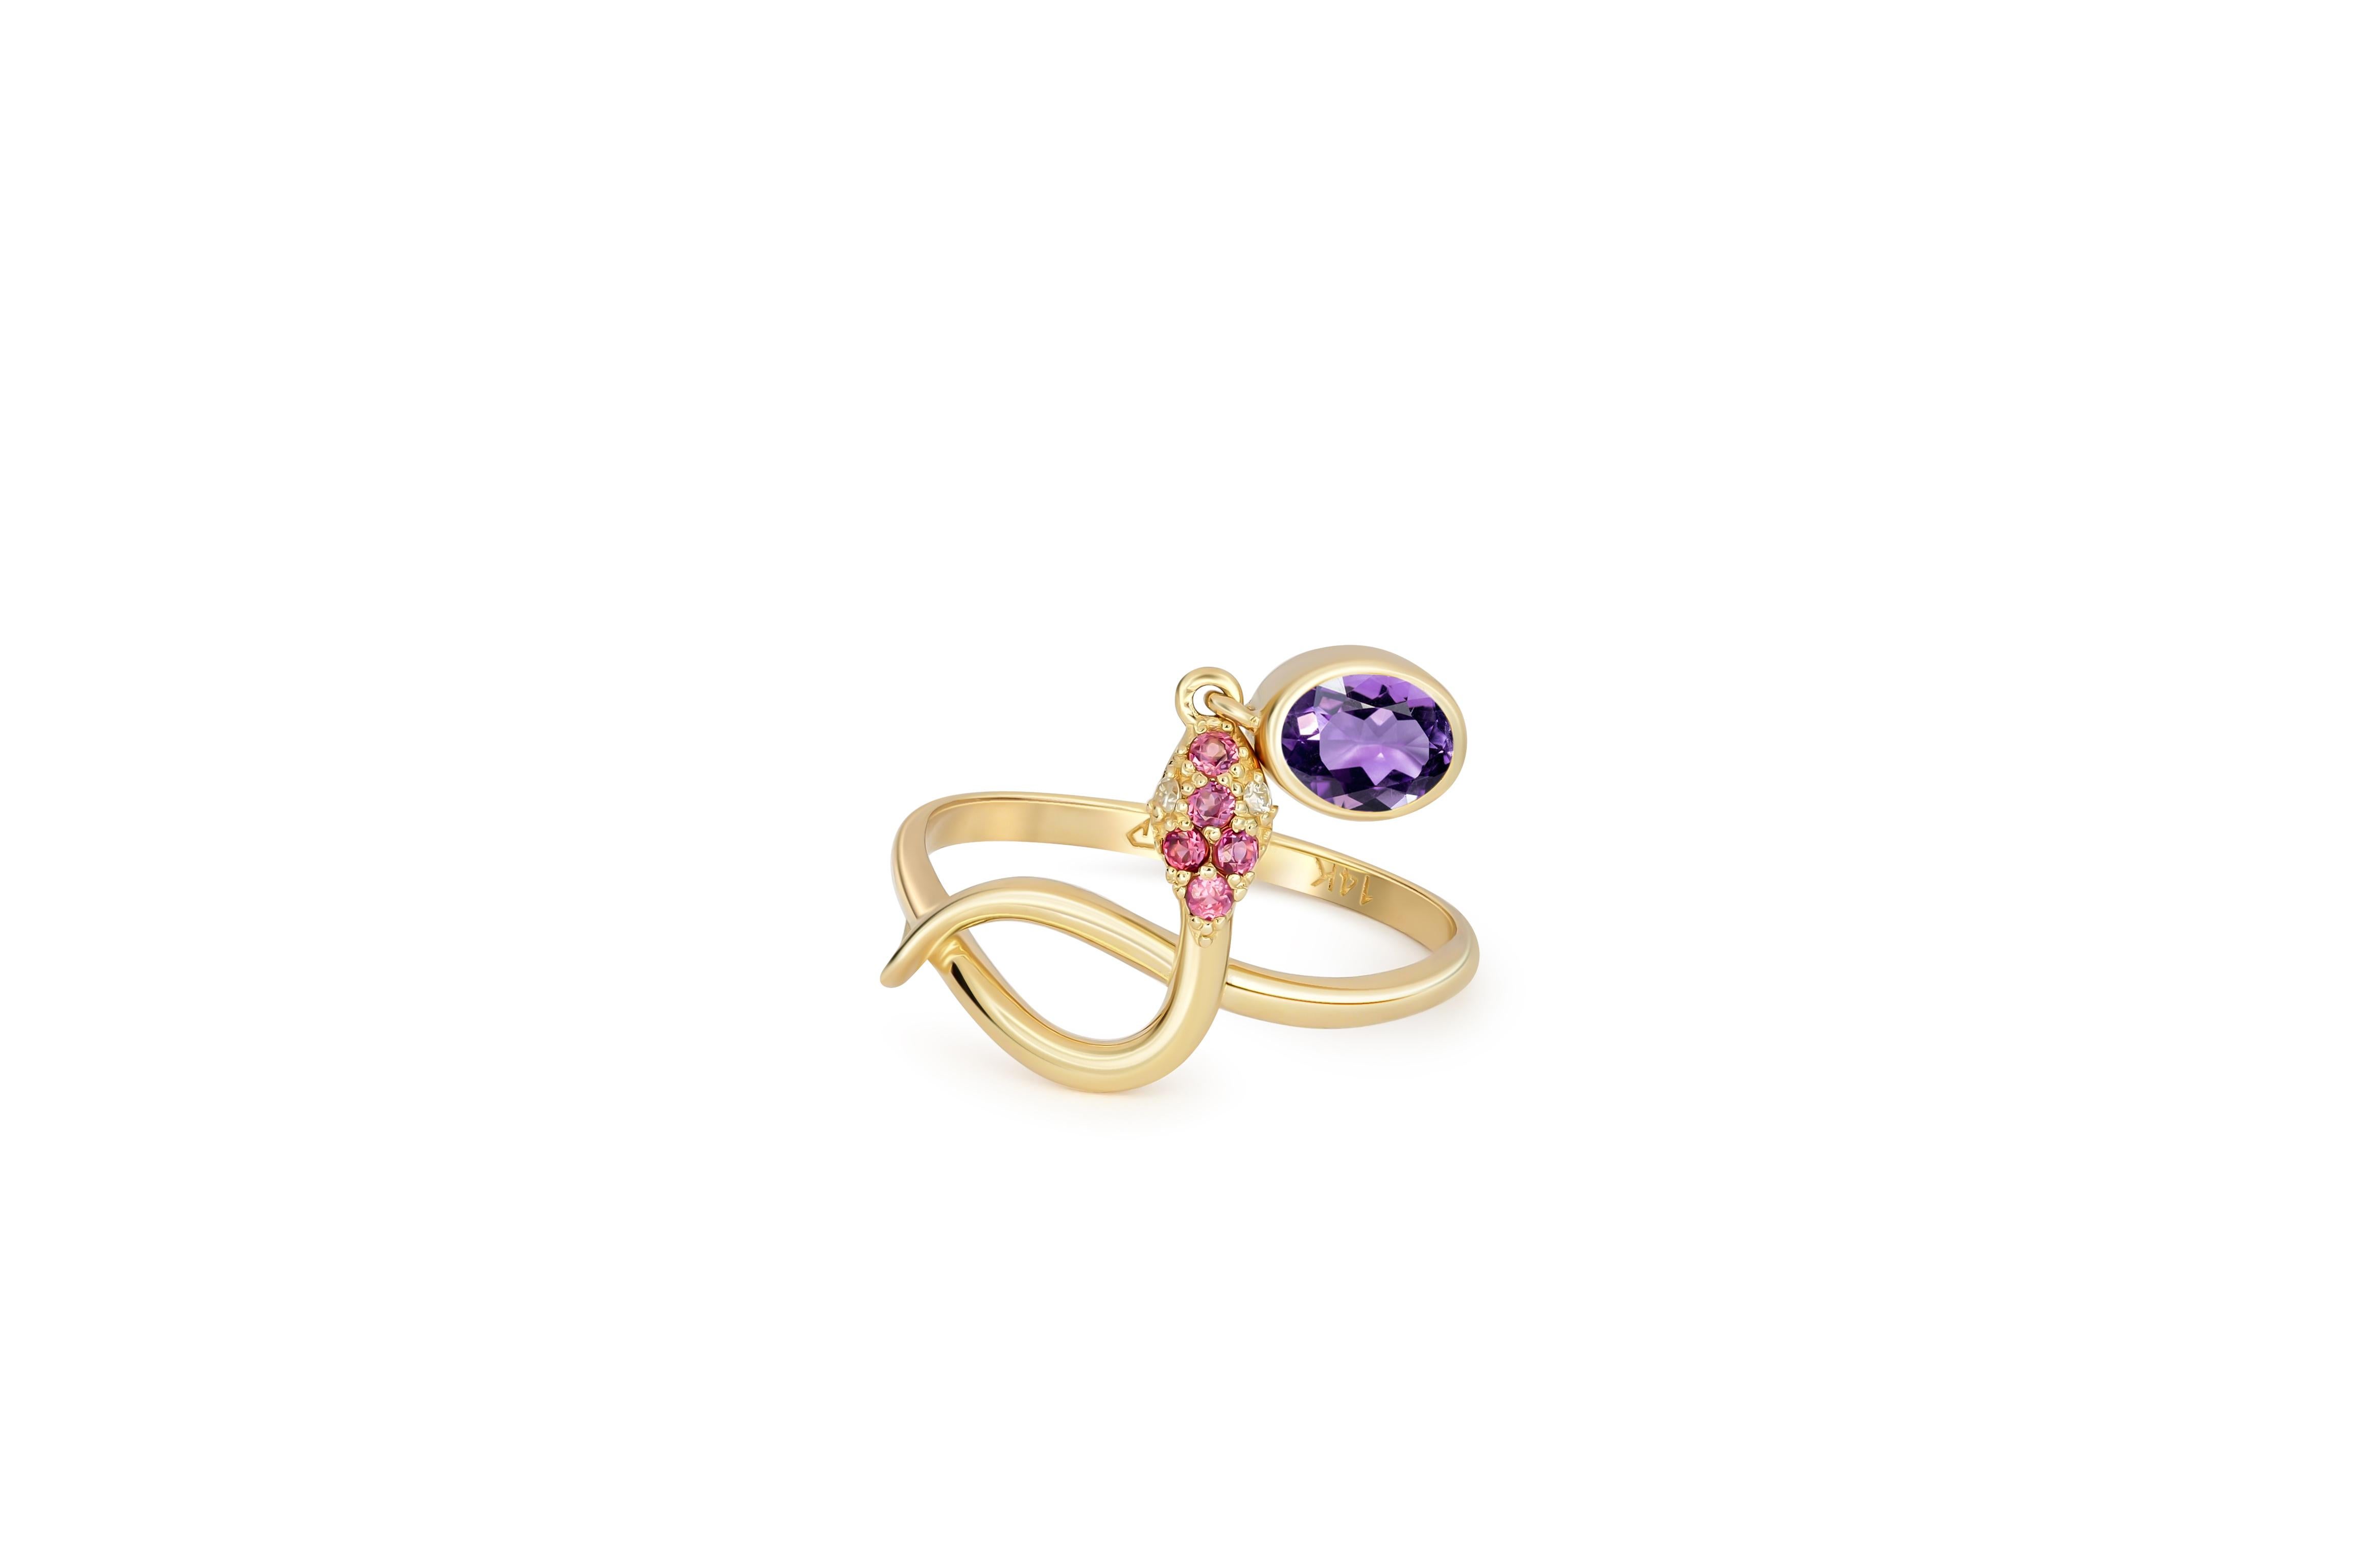 Snake ring with Amethyst. 
Amethyst gold ring. Snake gold ring. Genuine Amethyst ring. Oval Amethyst ring. February birthstone ring.

Metal: 14k gold.
Weight: 2.25 g. depends from size

Gemstones:
Amethyst: color - purple
Oval cut, 1.4 ct.